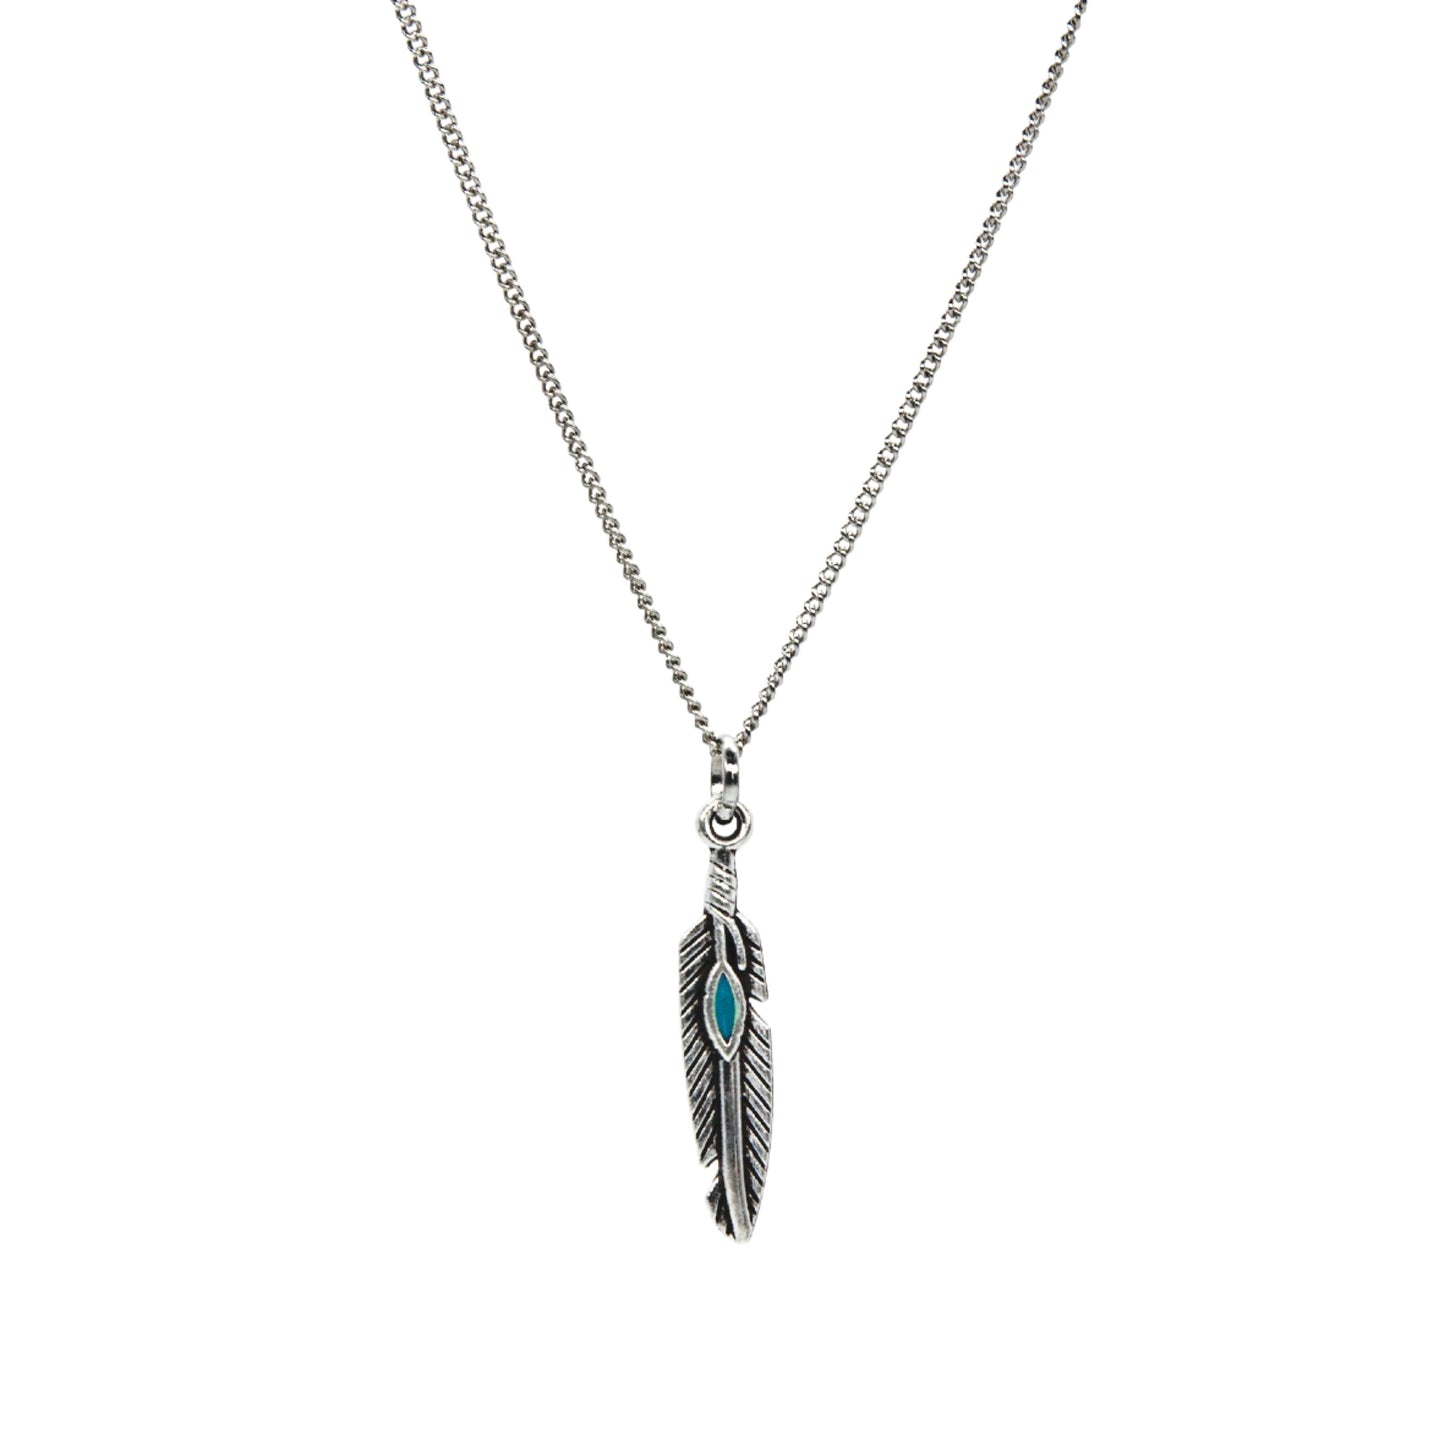 Silver Feather with Turquoise Inlay Necklace - Adjustable Length